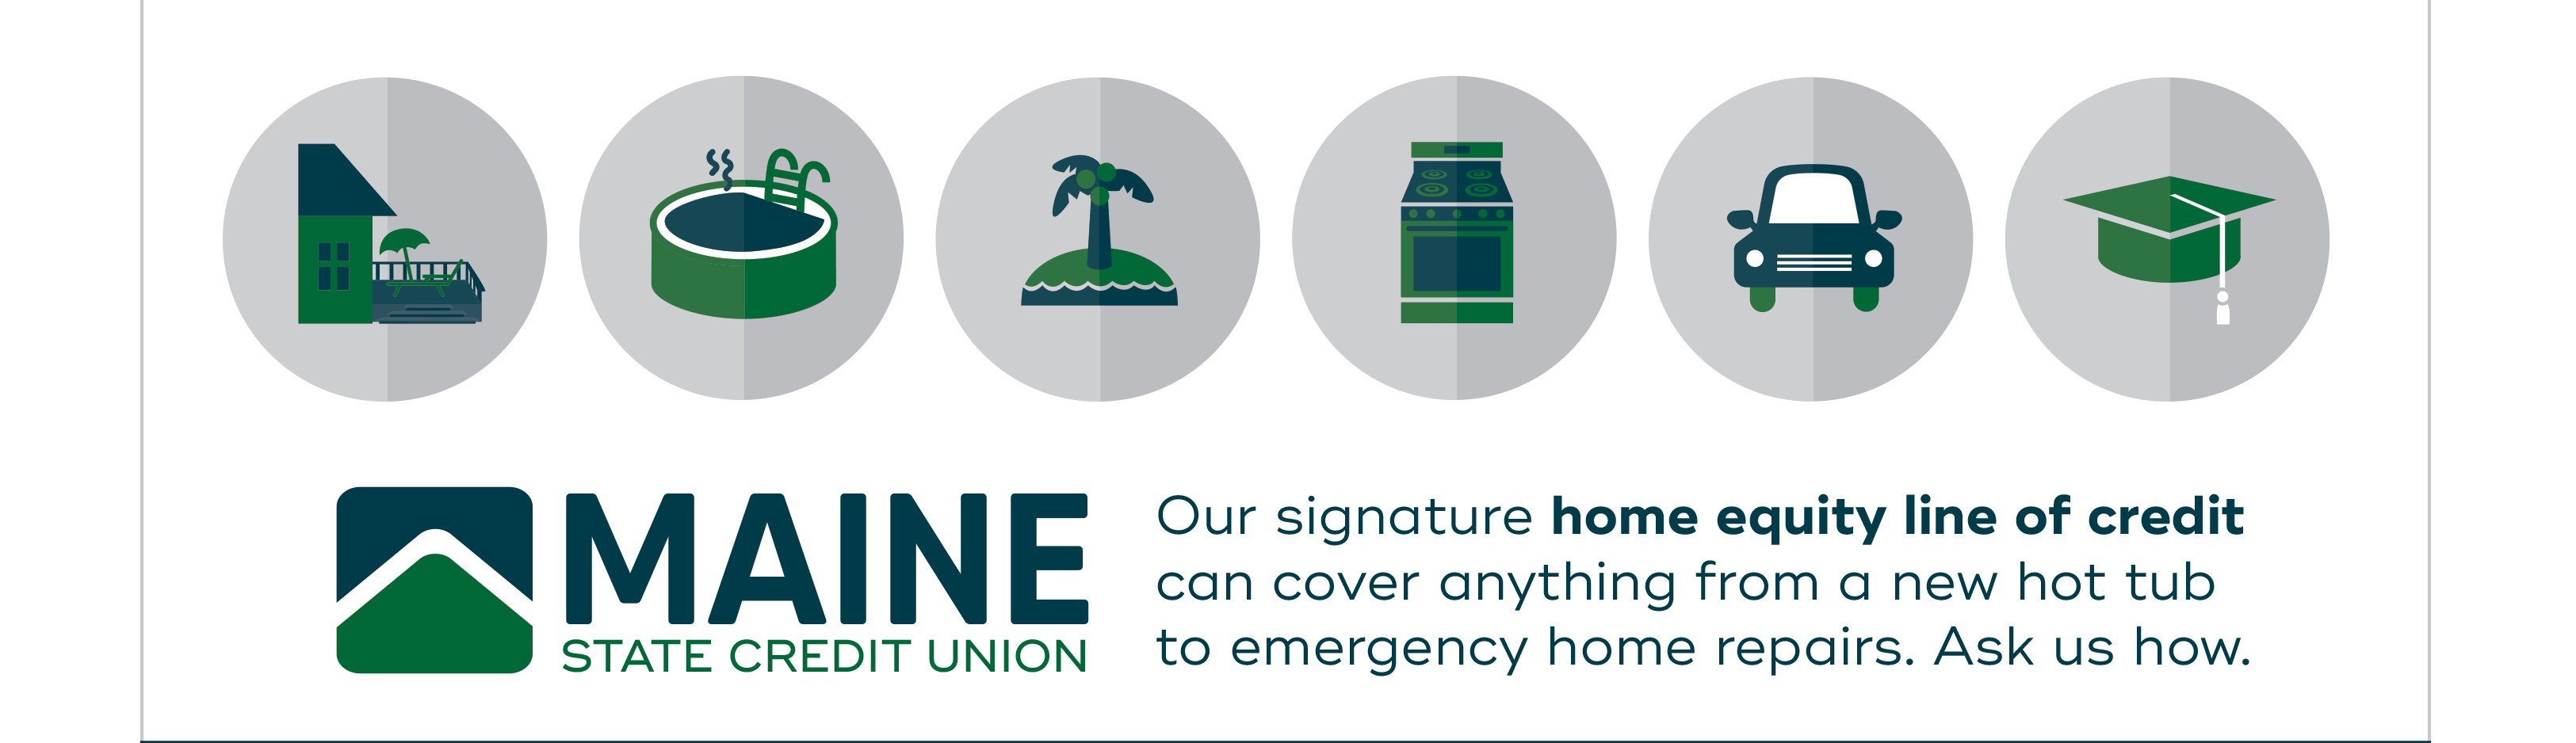 Maine State Credit Union: Home